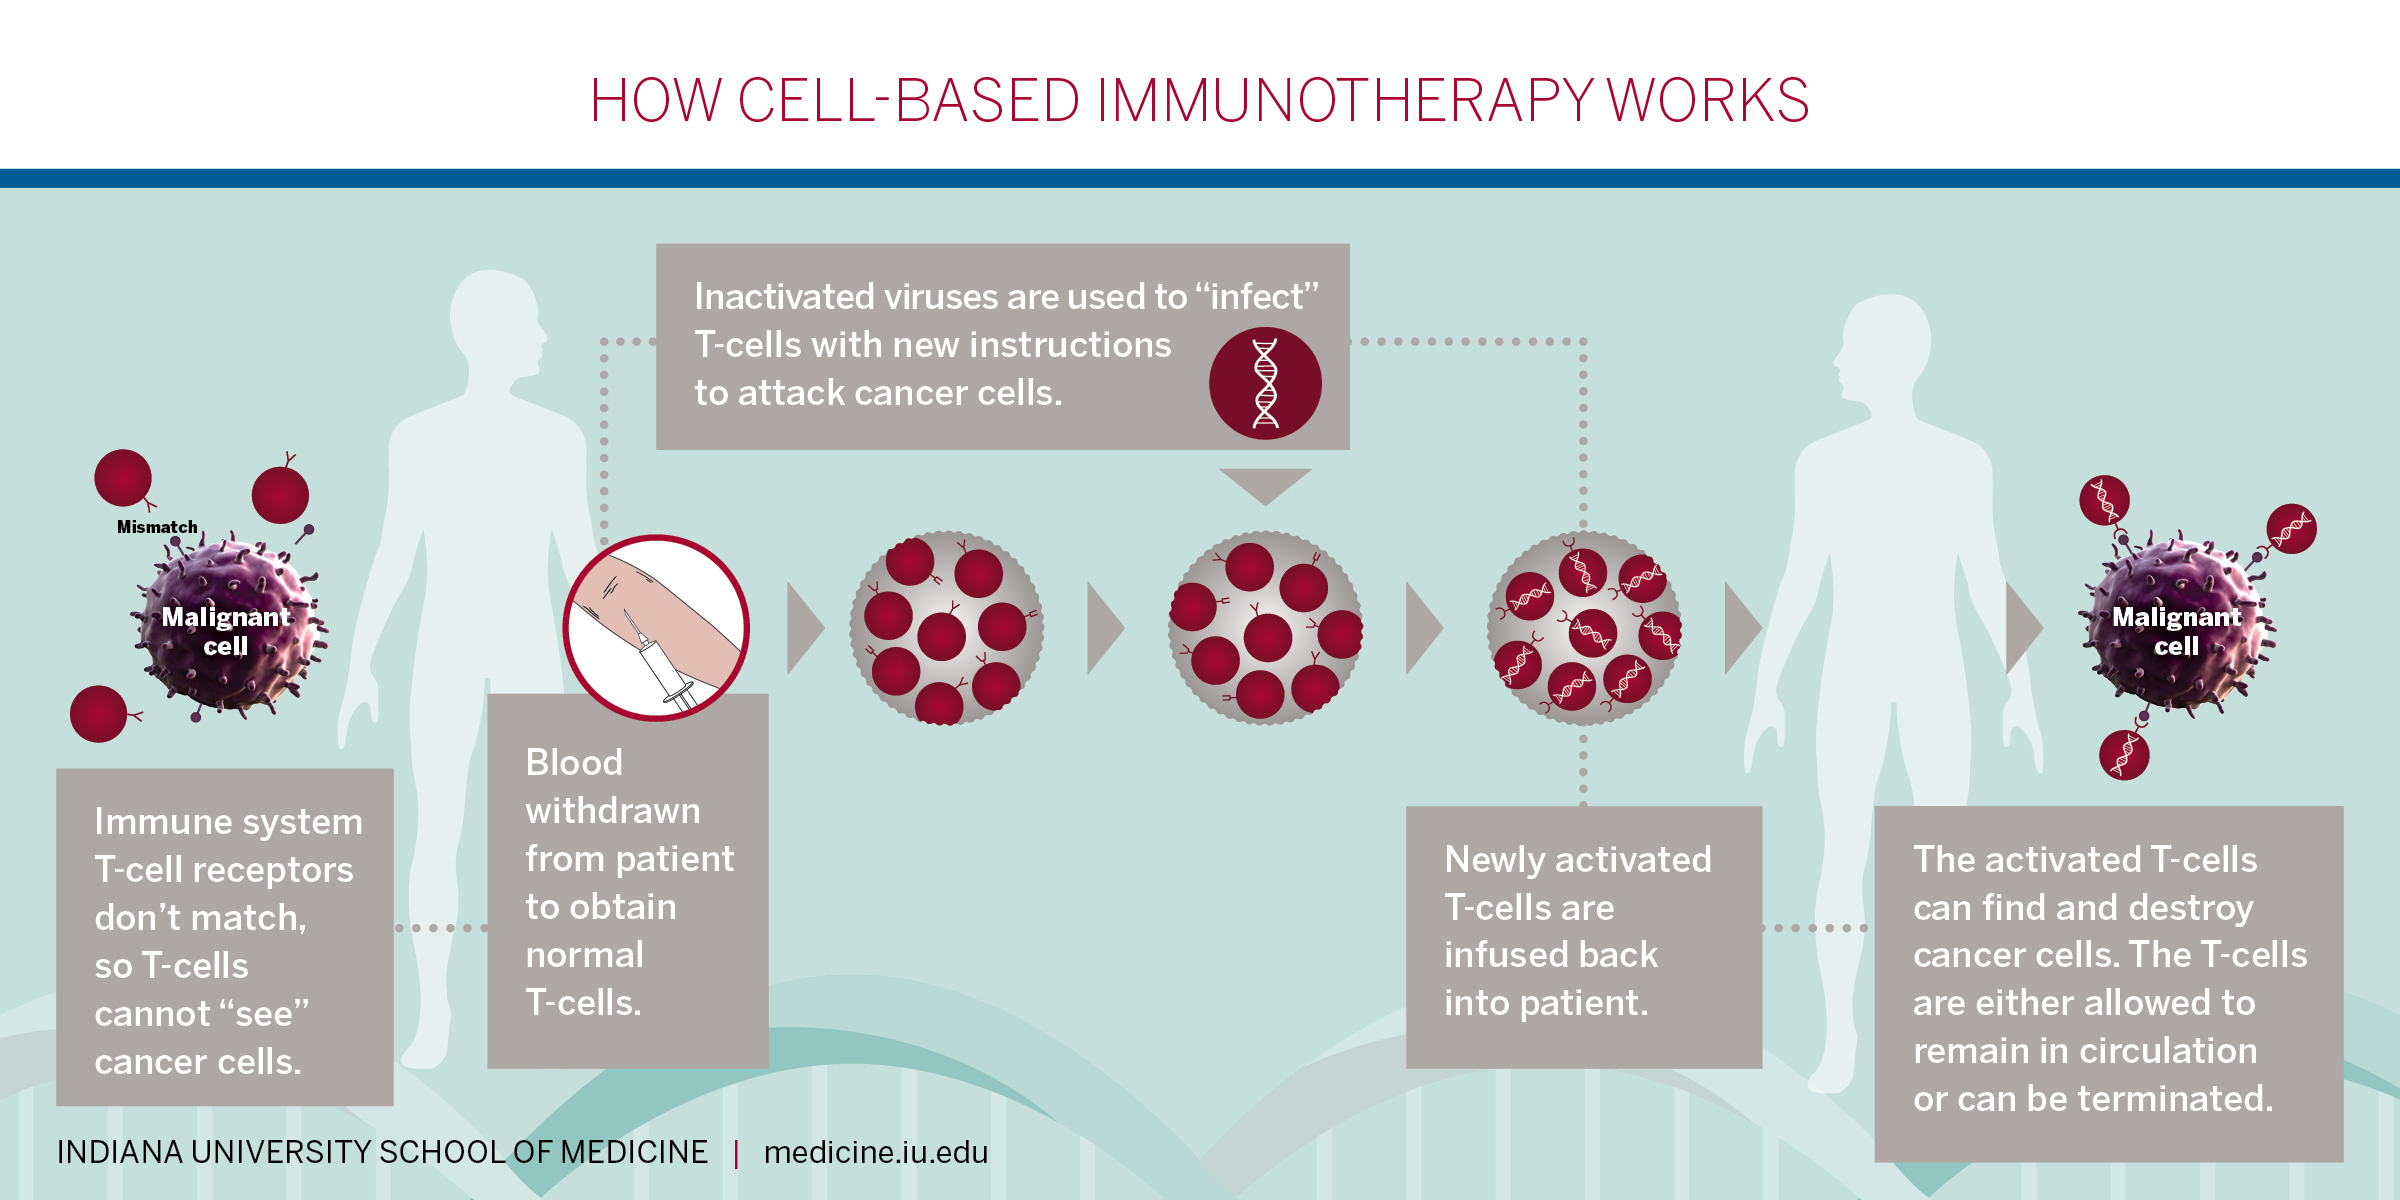 Infographic on how cell-based immunotherapies work, depicting the process of extracting T-cells from a patient’s blood sample, re-programming the T-cells to attack disease cells, and infusing the new cells back into the patient.